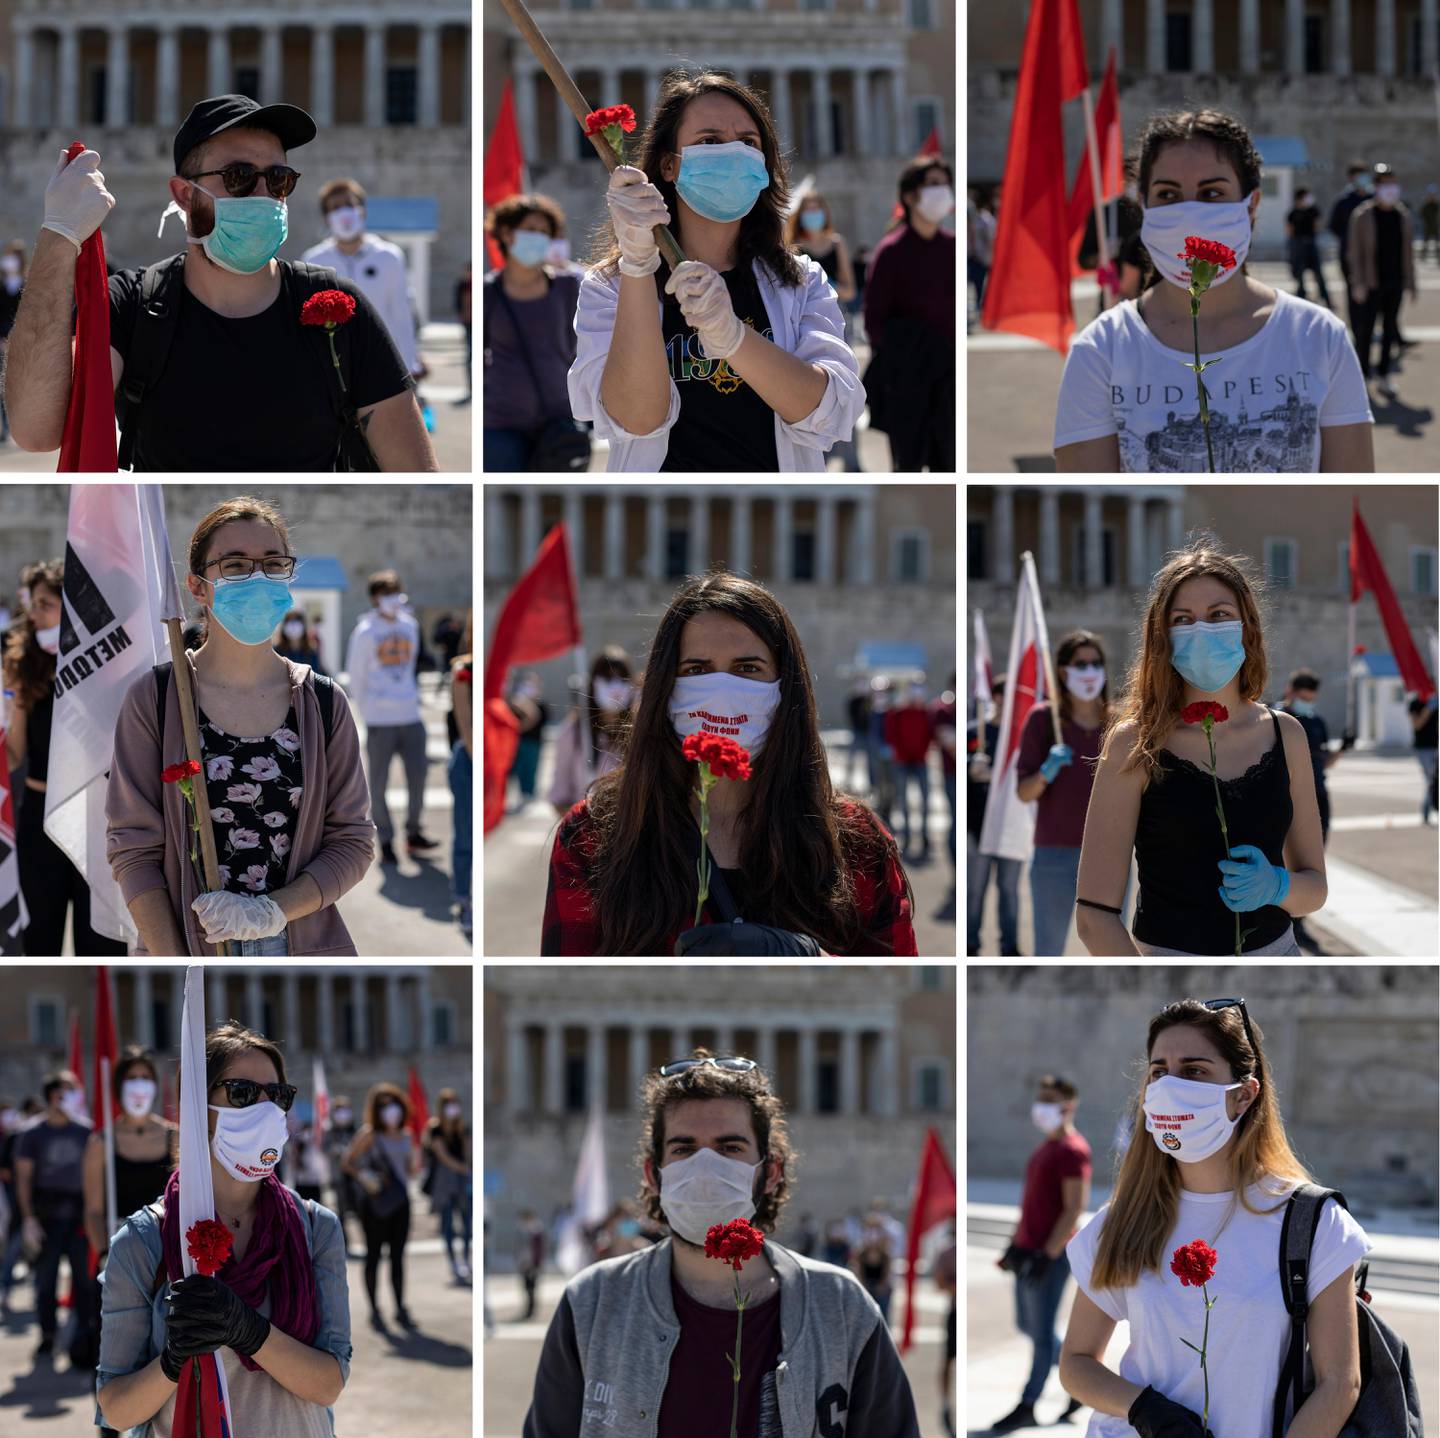 In this Friday, May 1, 2020 combination photo, featuring nine separate images, protesters from the communist party-affiliated PAME union wearing gloves and masks to protect against coronavirus, hold carnations during a May Day rally outside the Greek Parliament, in Athens. Hundreds of protesters gathered in central Athens and the northern Greek city of Thessaloniki to mark May Day, despite appeals from the government for May Day marches and commemorations to be postponed until next Saturday, when some lockdown measures will have been lifted. (AP Photo/Petros Giannakouris)